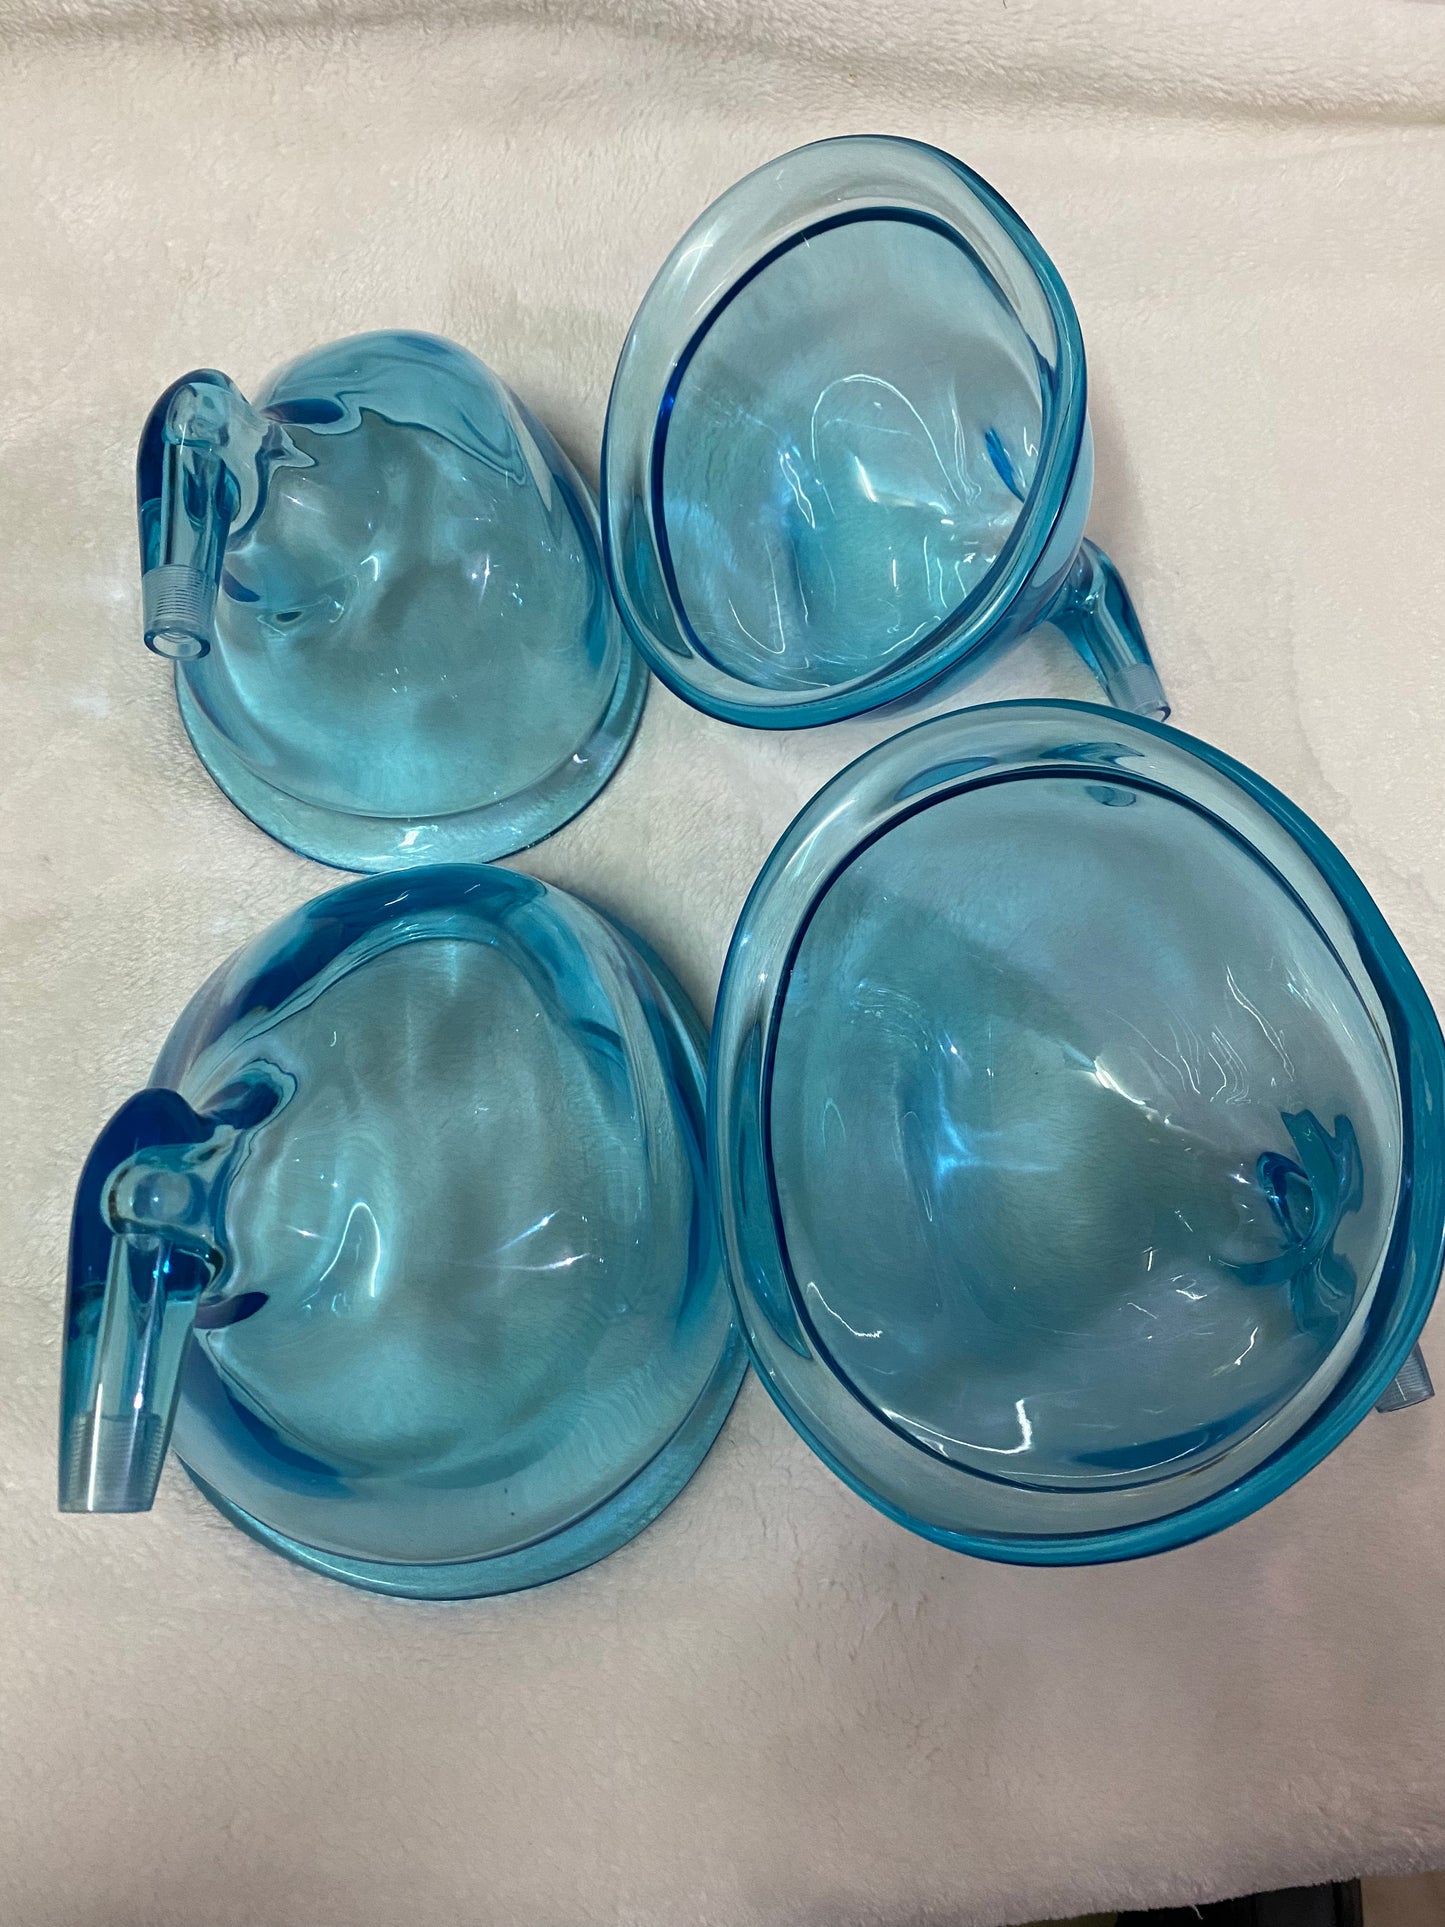 Newest Columbia Transparent Buttock Lifts Butt Cups For Vacuum Cupping Machine